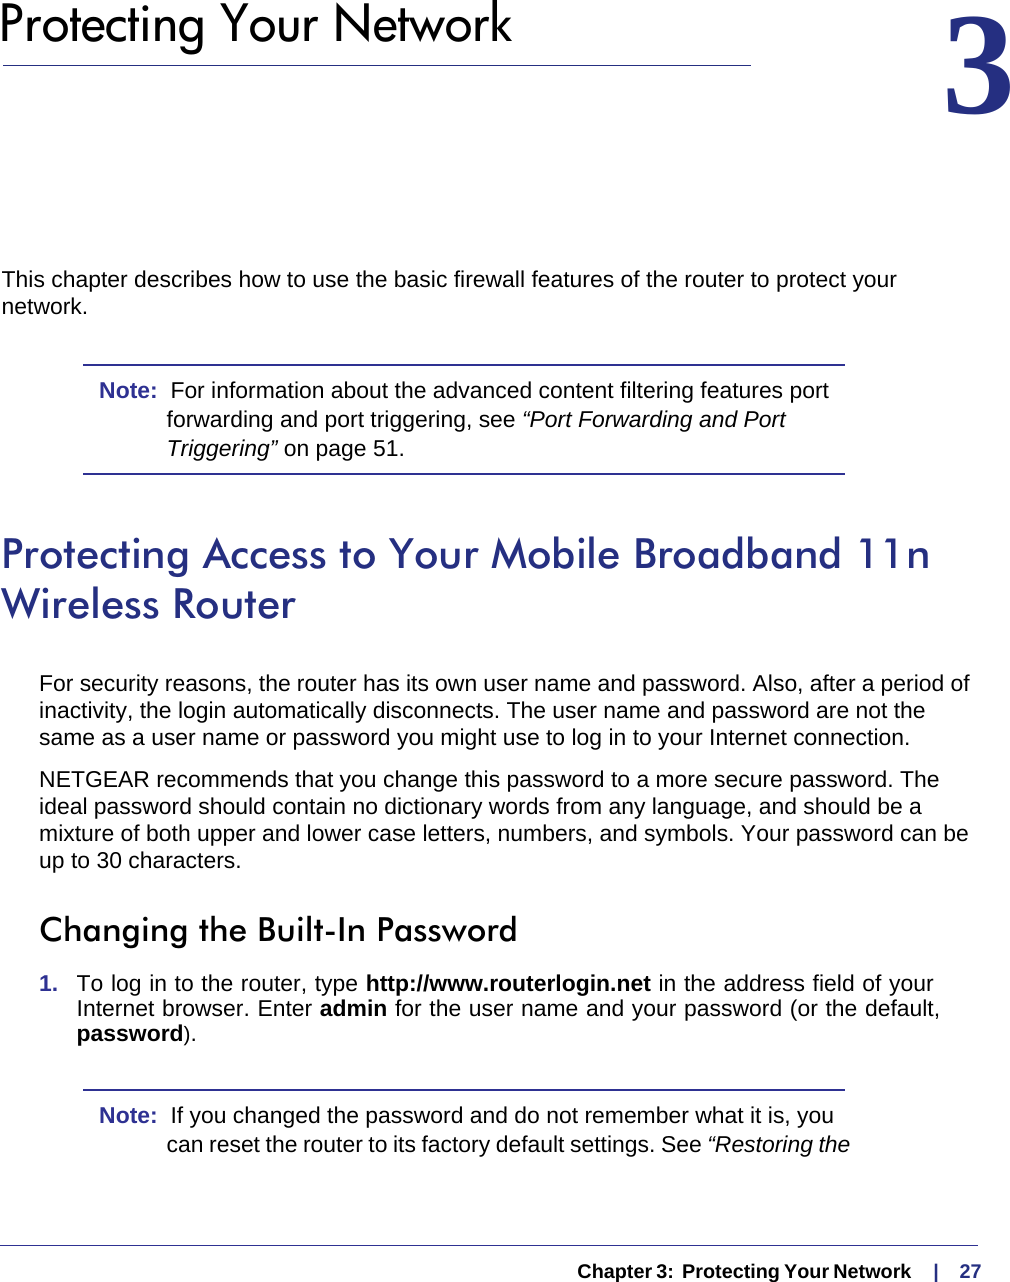   Chapter 3:  Protecting Your Network     |    273.  Protecting Your Network 3This chapter describes how to use the basic firewall features of the router to protect your network.Note:  For information about the advanced content filtering features port forwarding and port triggering, see “Port Forwarding and Port Triggering” on page 51.Protecting Access to Your Mobile Broadband 11n Wireless RouterFor security reasons, the router has its own user name and password. Also, after a period of inactivity, the login automatically disconnects. The user name and password are not the same as a user name or password you might use to log in to your Internet connection.NETGEAR recommends that you change this password to a more secure password. The ideal password should contain no dictionary words from any language, and should be a mixture of both upper and lower case letters, numbers, and symbols. Your password can be up to 30 characters.Changing the Built-In Password1.  To log in to the router, type http://www.routerlogin.net in the address field of your Internet browser. Enter admin for the user name and your password (or the default, password).Note:  If you changed the password and do not remember what it is, you can reset the router to its factory default settings. See “Restoring the 